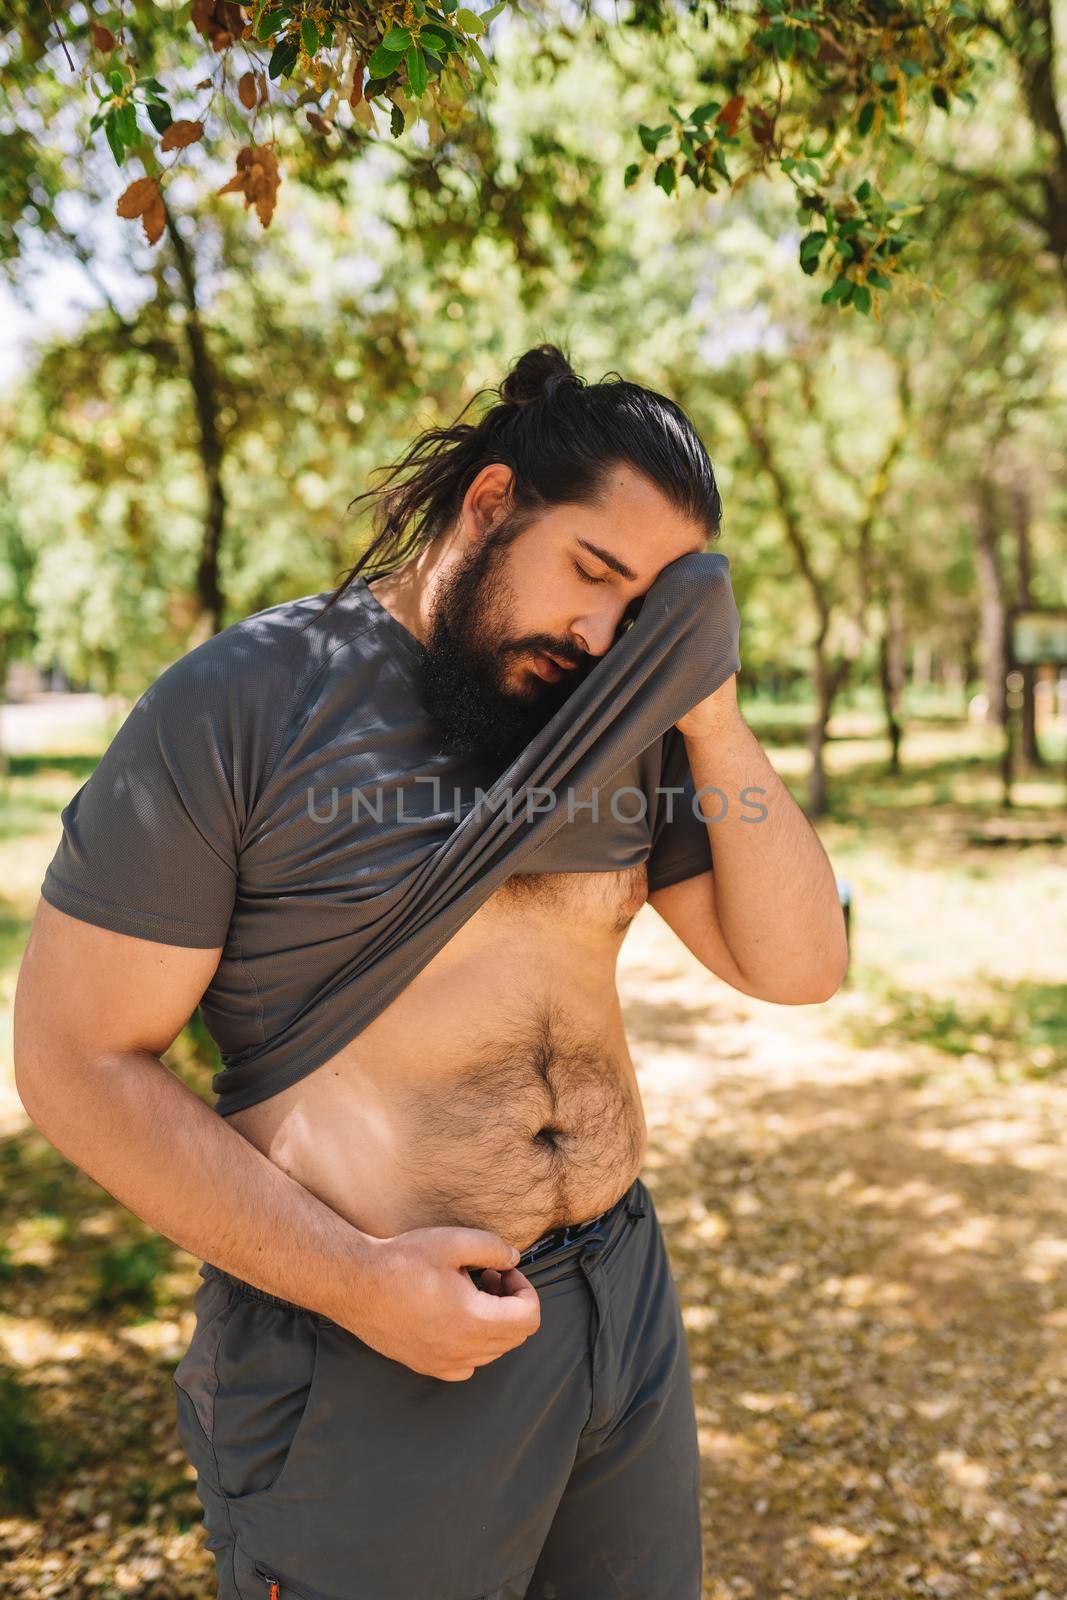 young man practising sport outdoors wiping his sweat with his t-shirt. athlete preparing for a marathon. health and wellness lifestyle. health and wellness lifestyle.outdoor public park, natural sunlight. vertical.